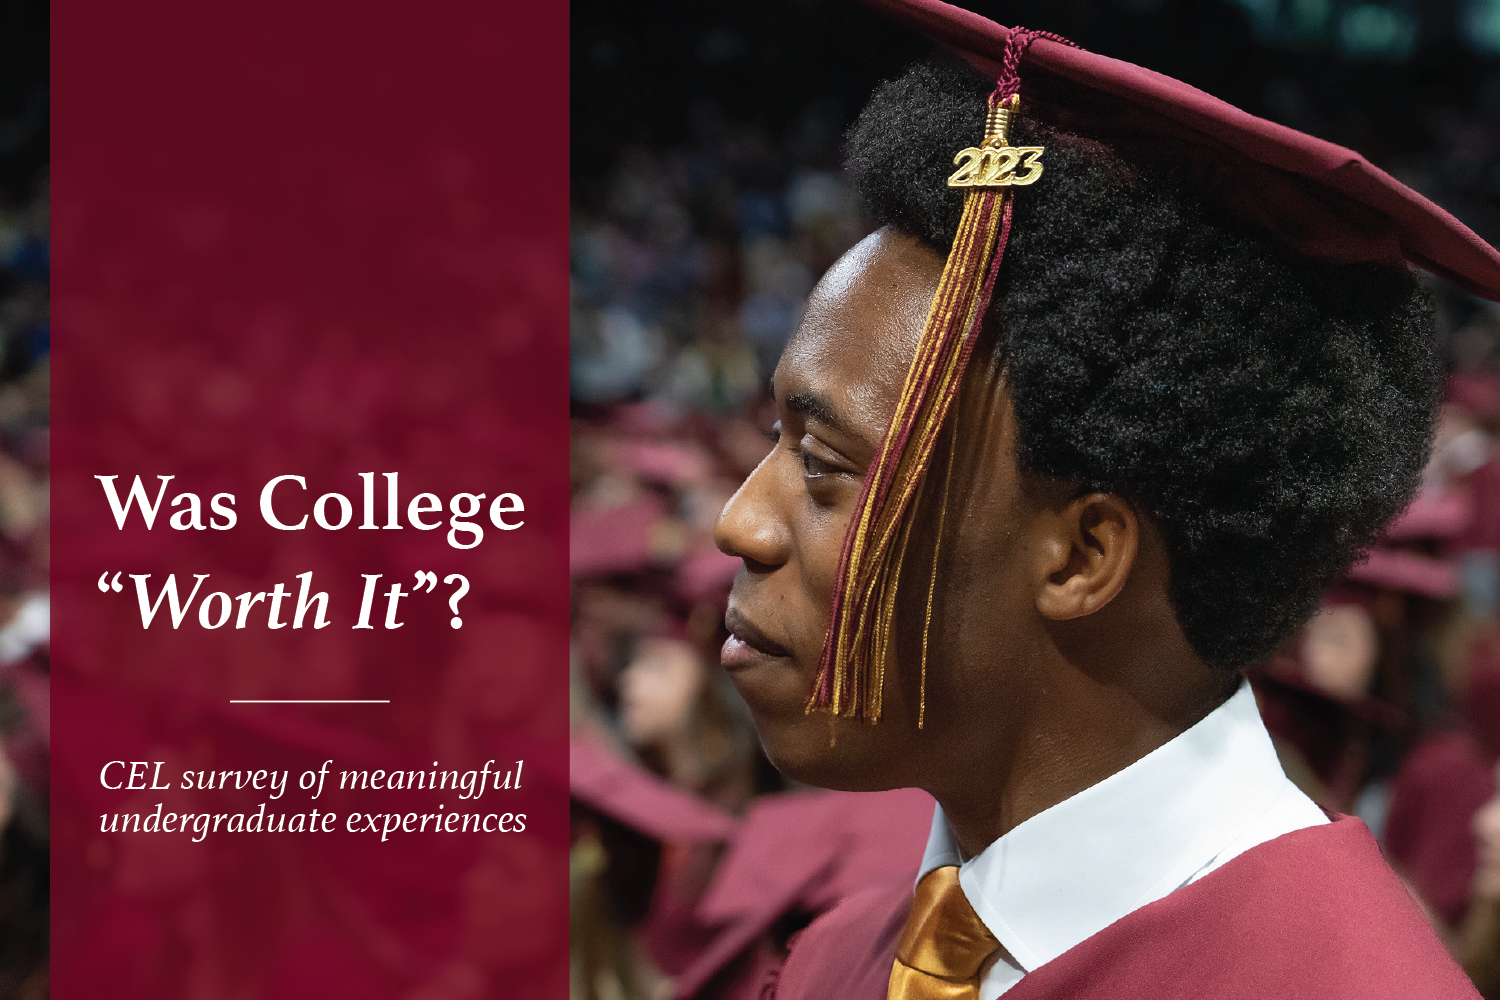 A man in graduation robes and cap is shown in profile. Text overlay reads, "Was College 'Worth It'? - CEL survey of meaningful undergraduate experiences"